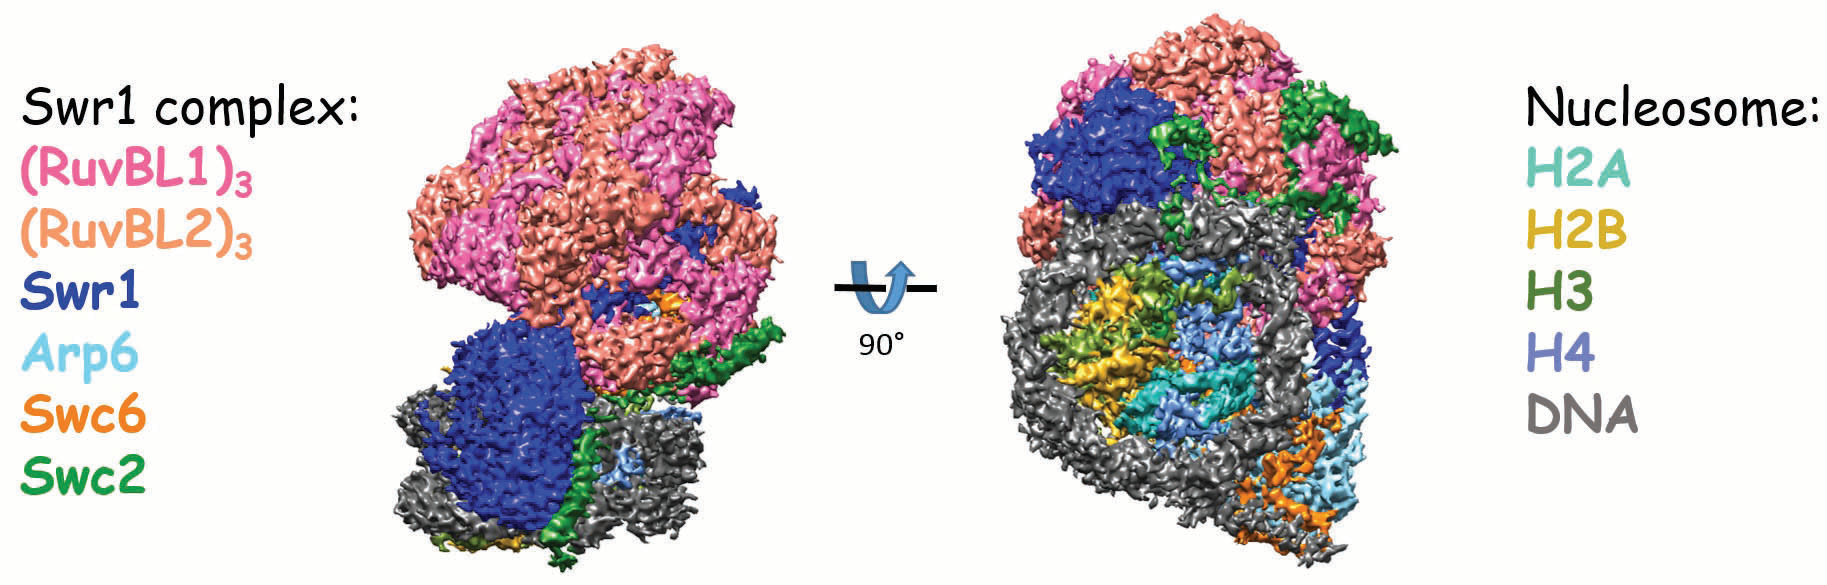 Figure 1: Overview of cryo-EM 3D map of SWR1:nucleosome complex at 3.6 Å resolution.